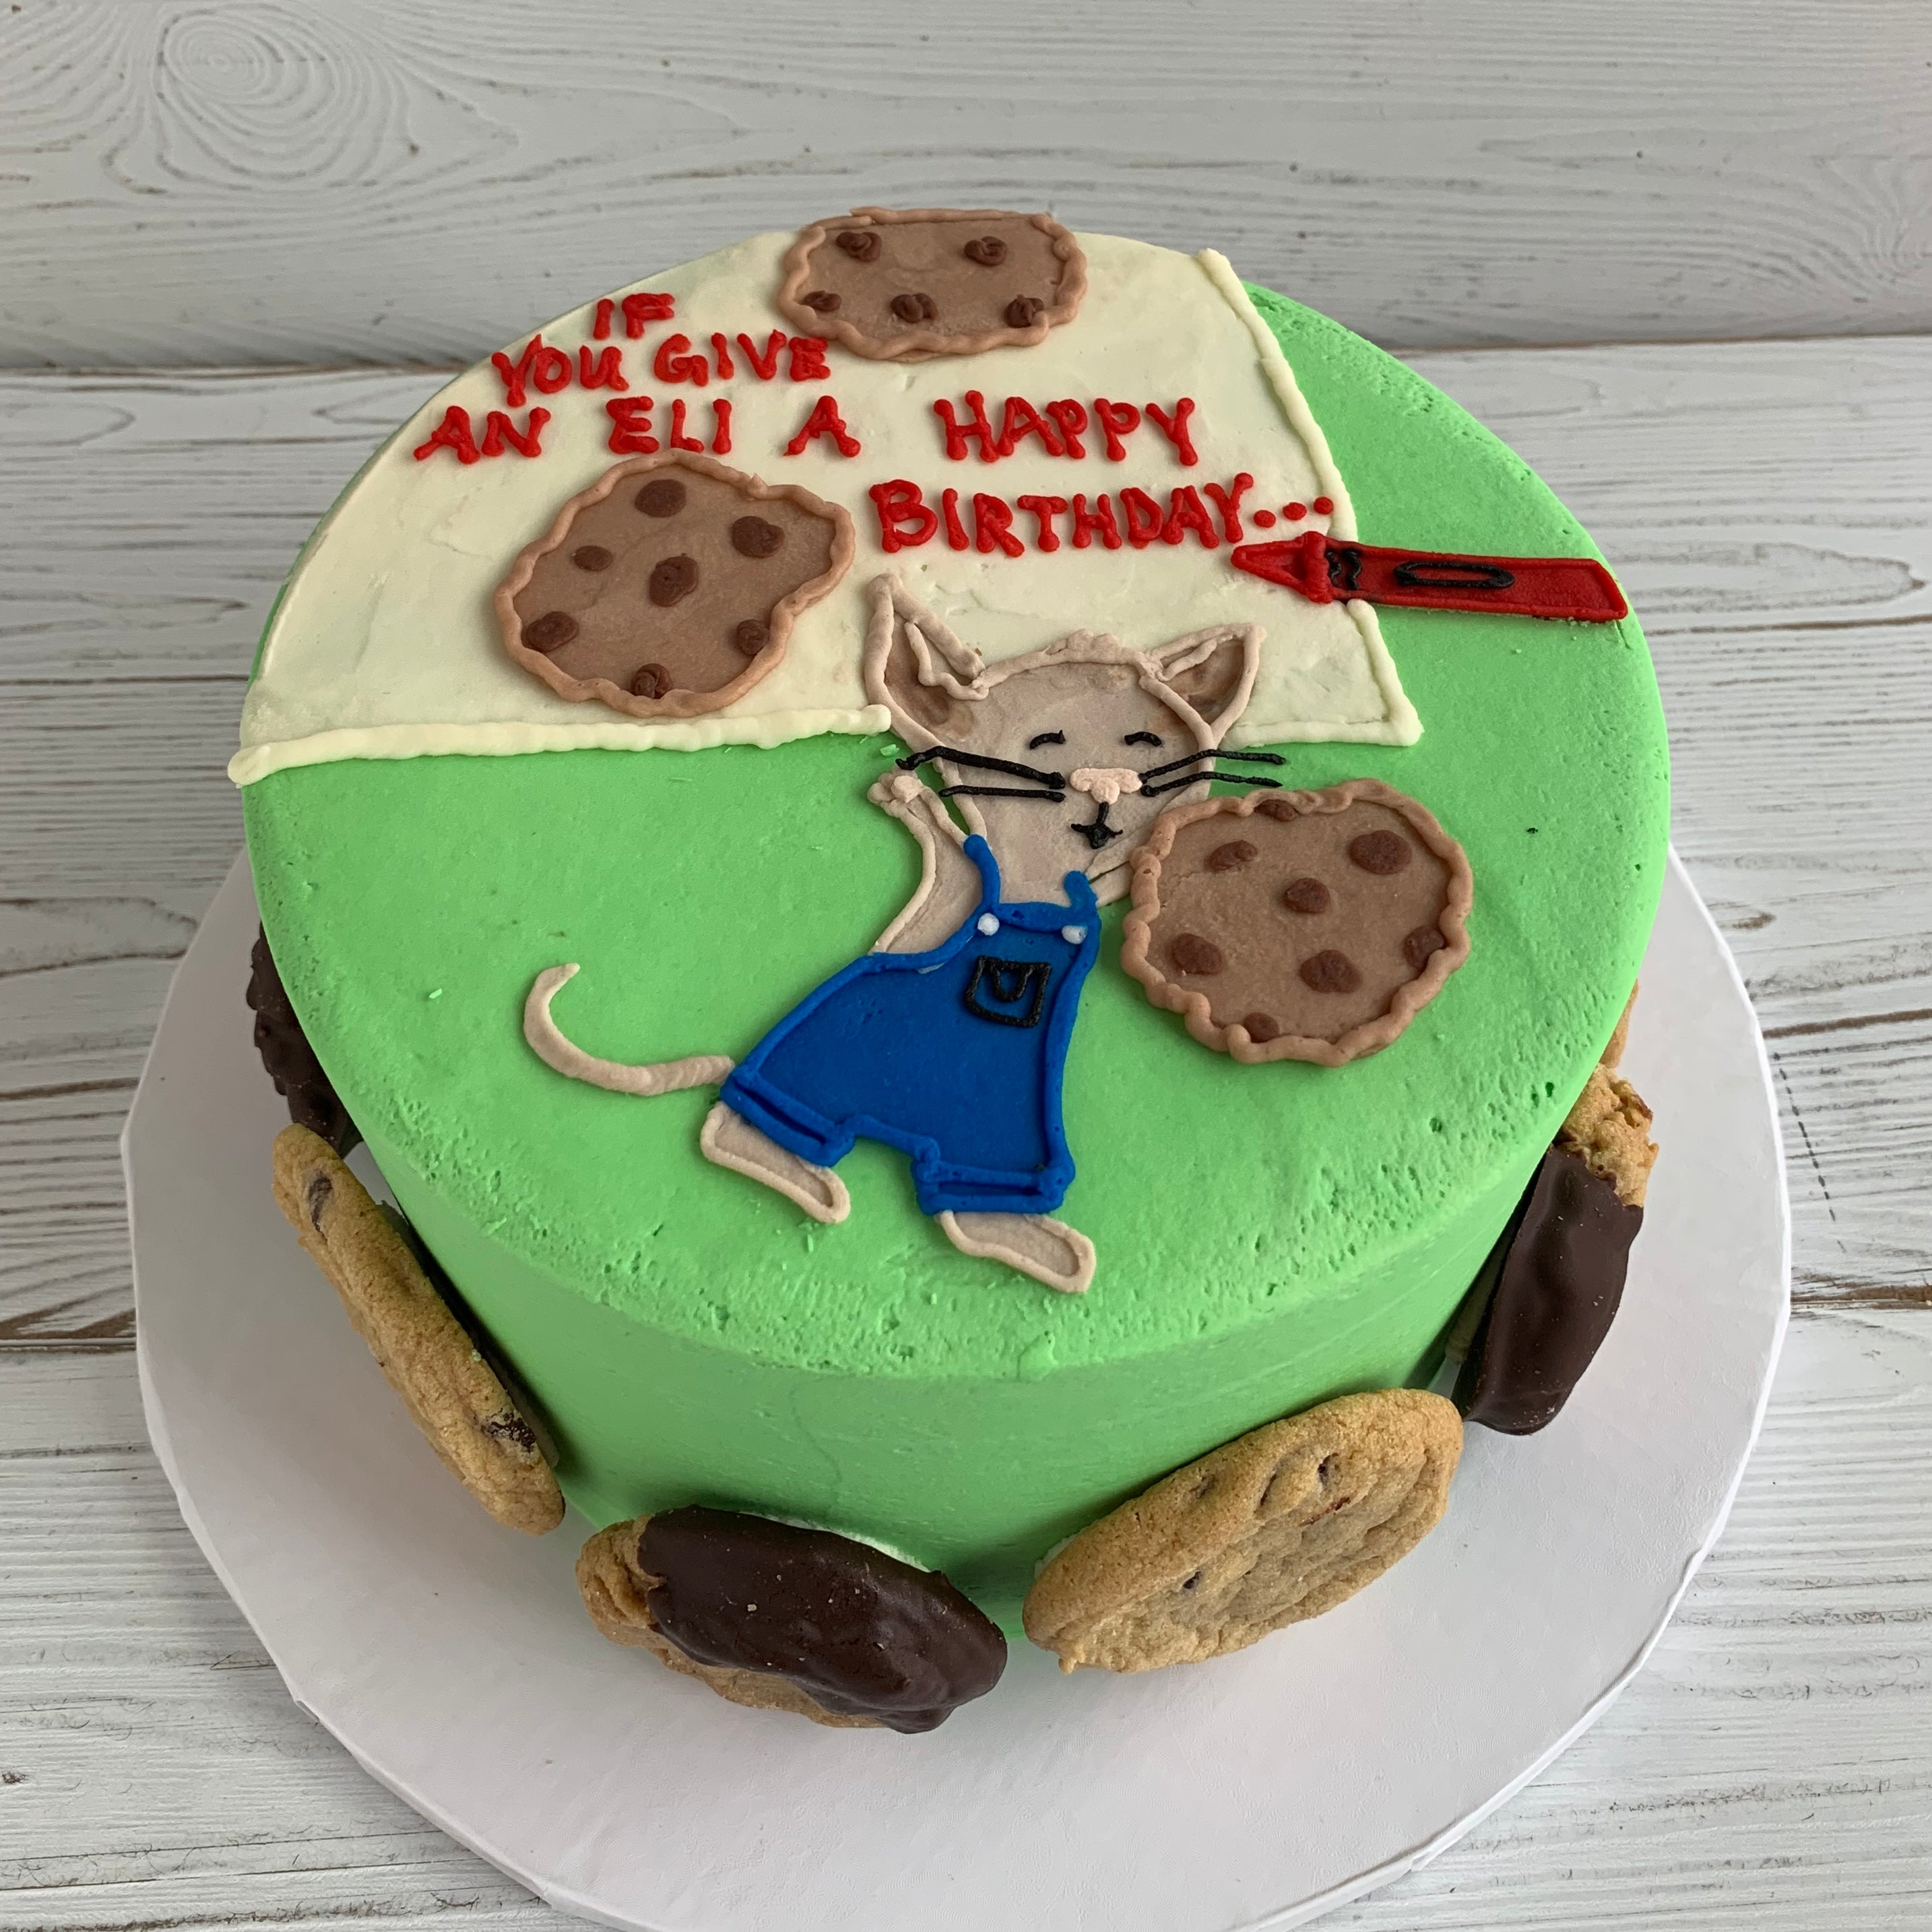 If You Give a Mouse a Cookie Cake